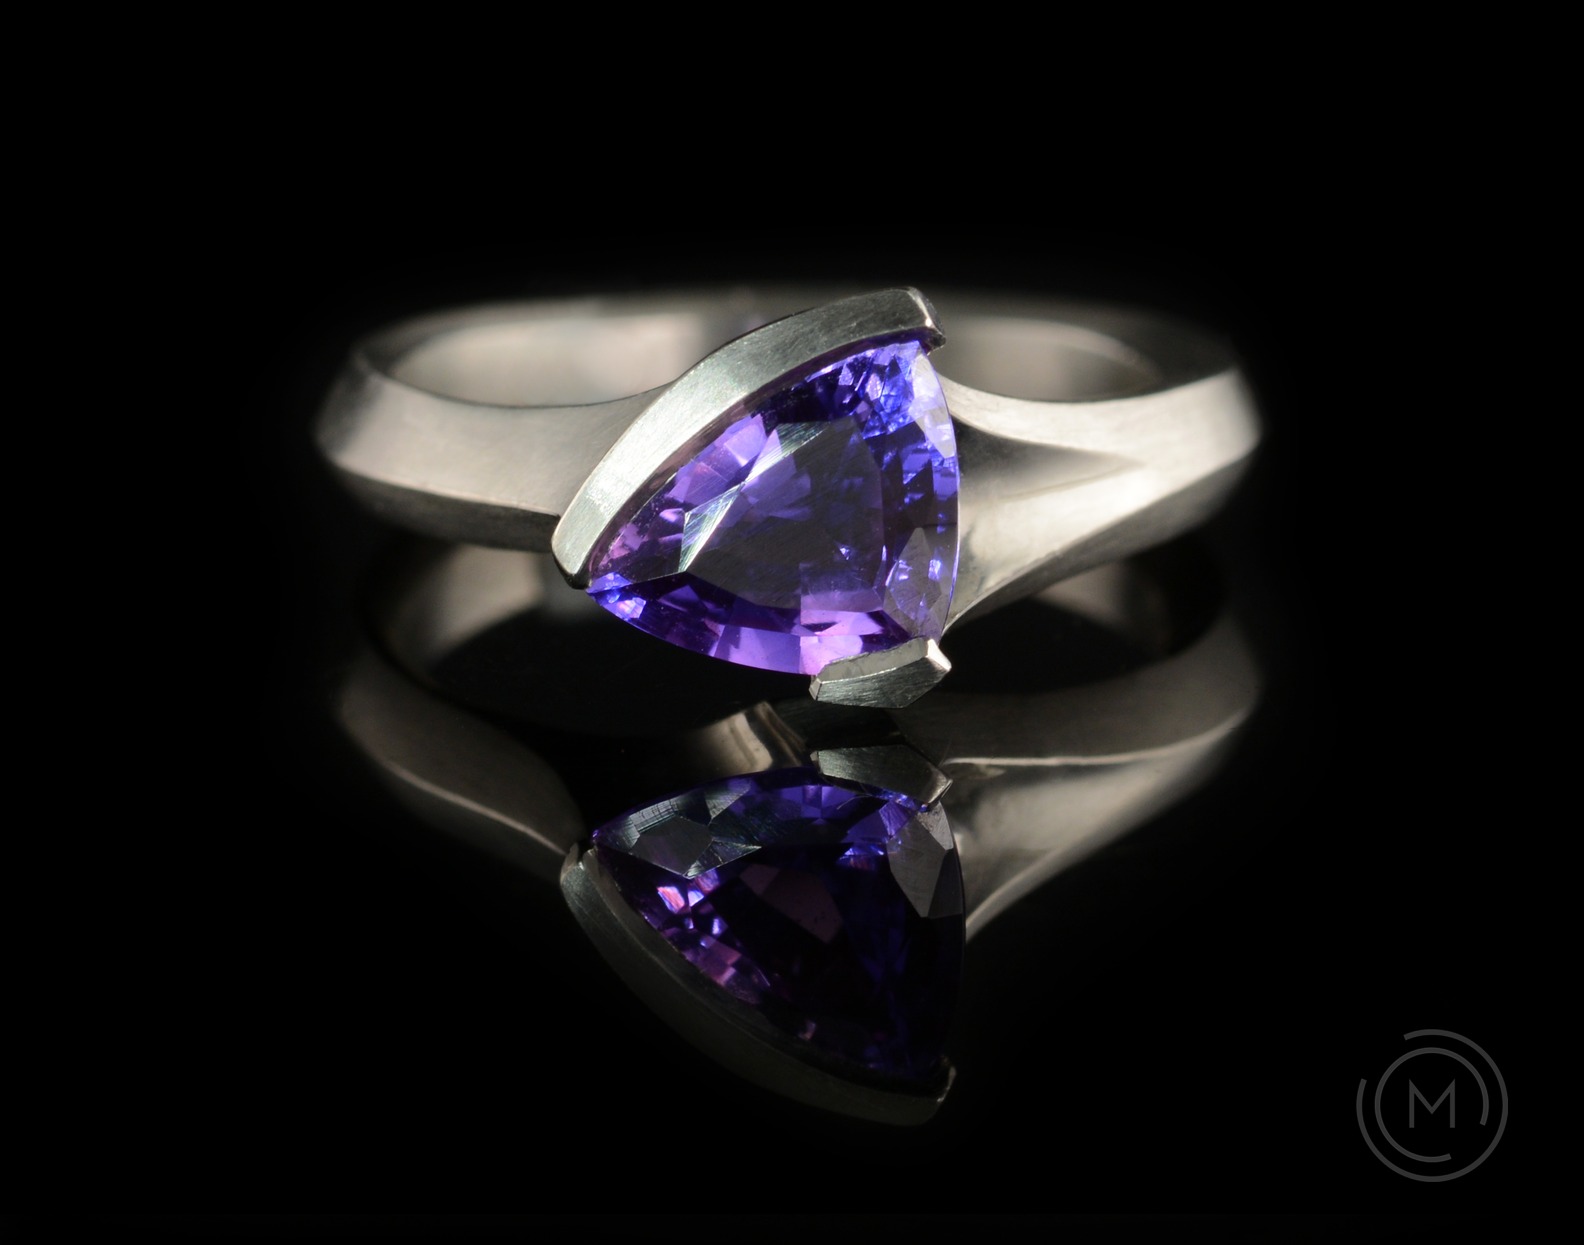 Carved platinum engagement ring with purple trillion sapphire